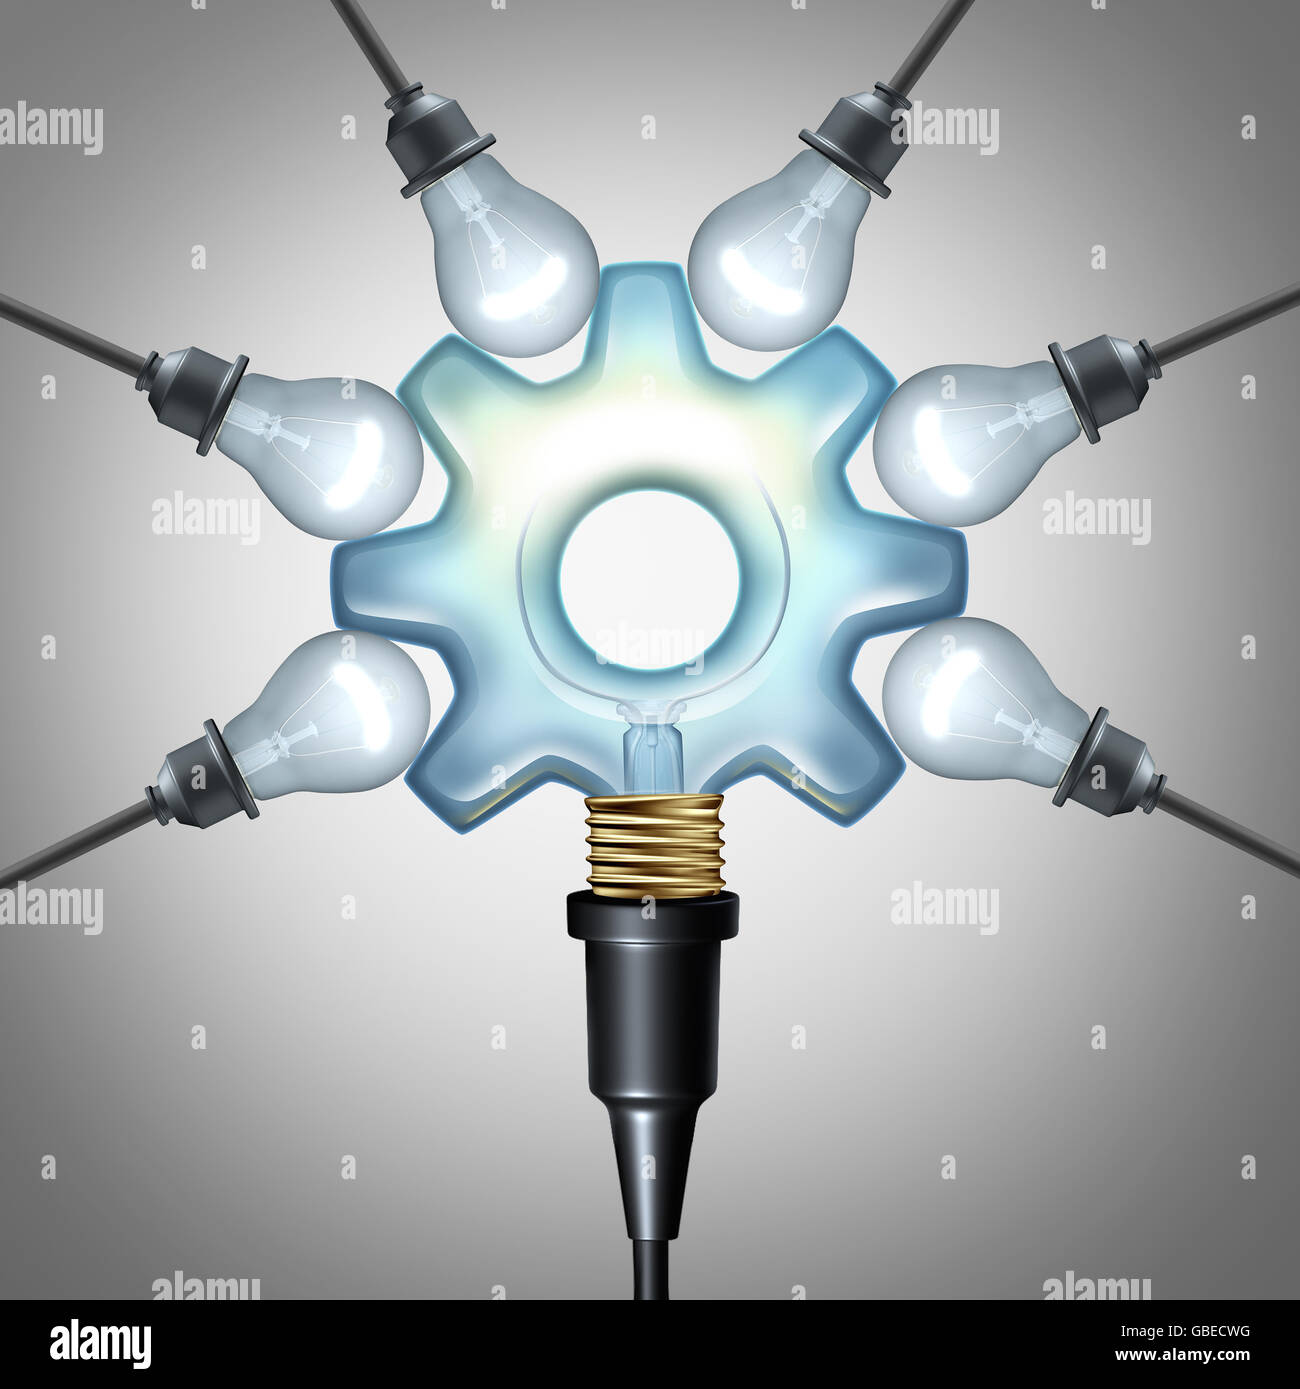 Creative economy and creativity industry concept as a center lightbulb shaped as a gear or cog connected to a group of light bulbs as a business symbol for marketing communication solution or advertising of ideas and imaginative innovation as a 3D illustr Stock Photo